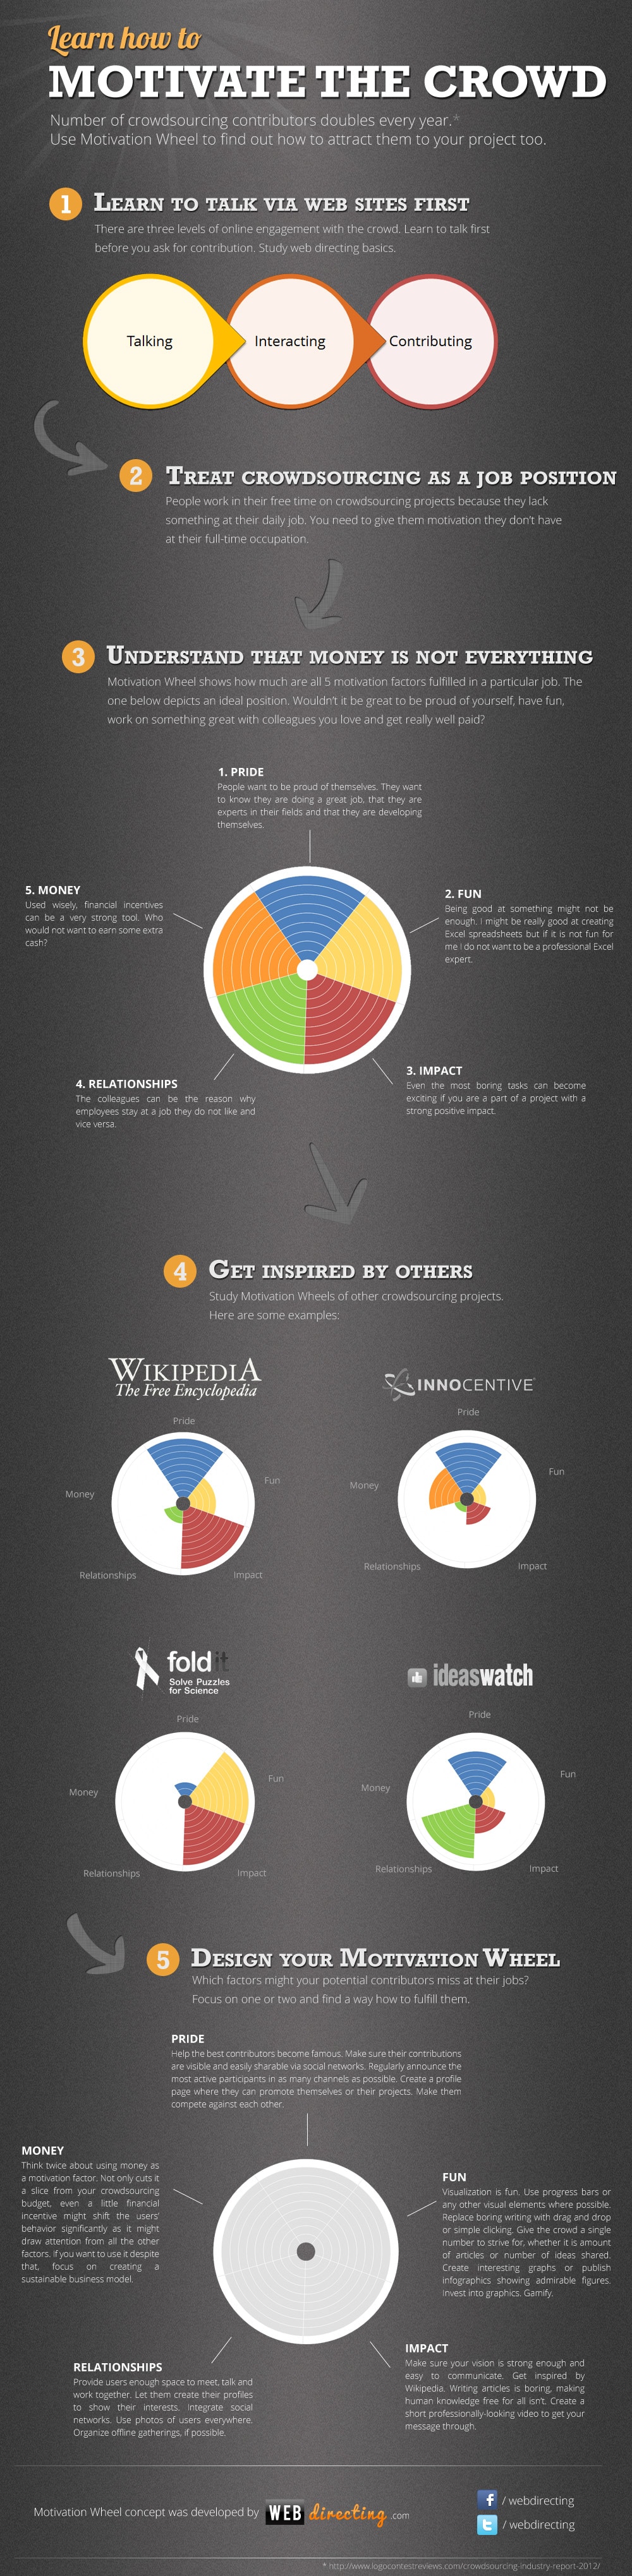 How To Motivate & Inspire Social Media Interaction [Infographic]